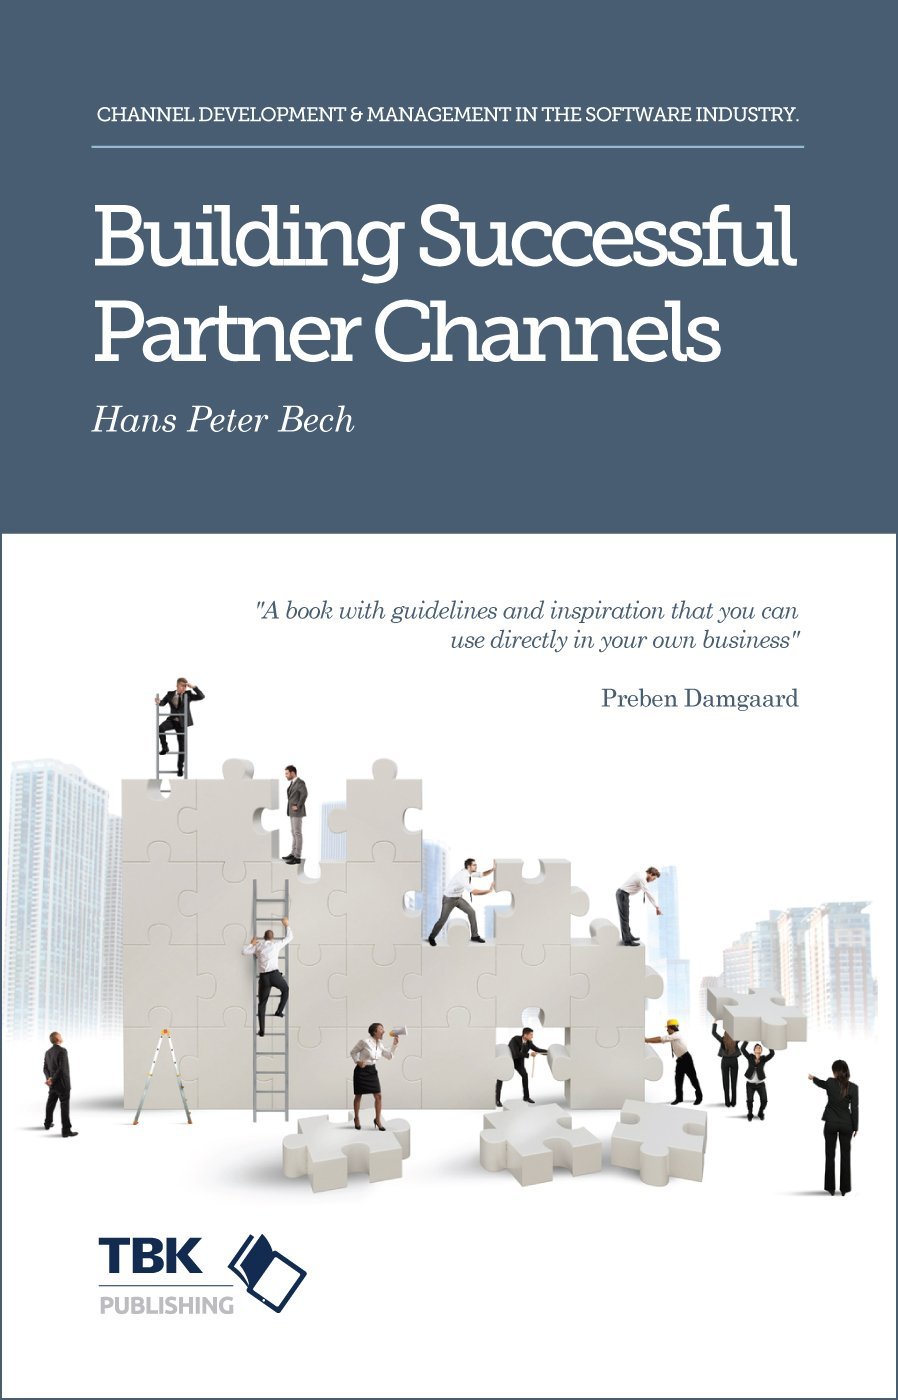 Building Successful Partner Channels: In The Software Industry